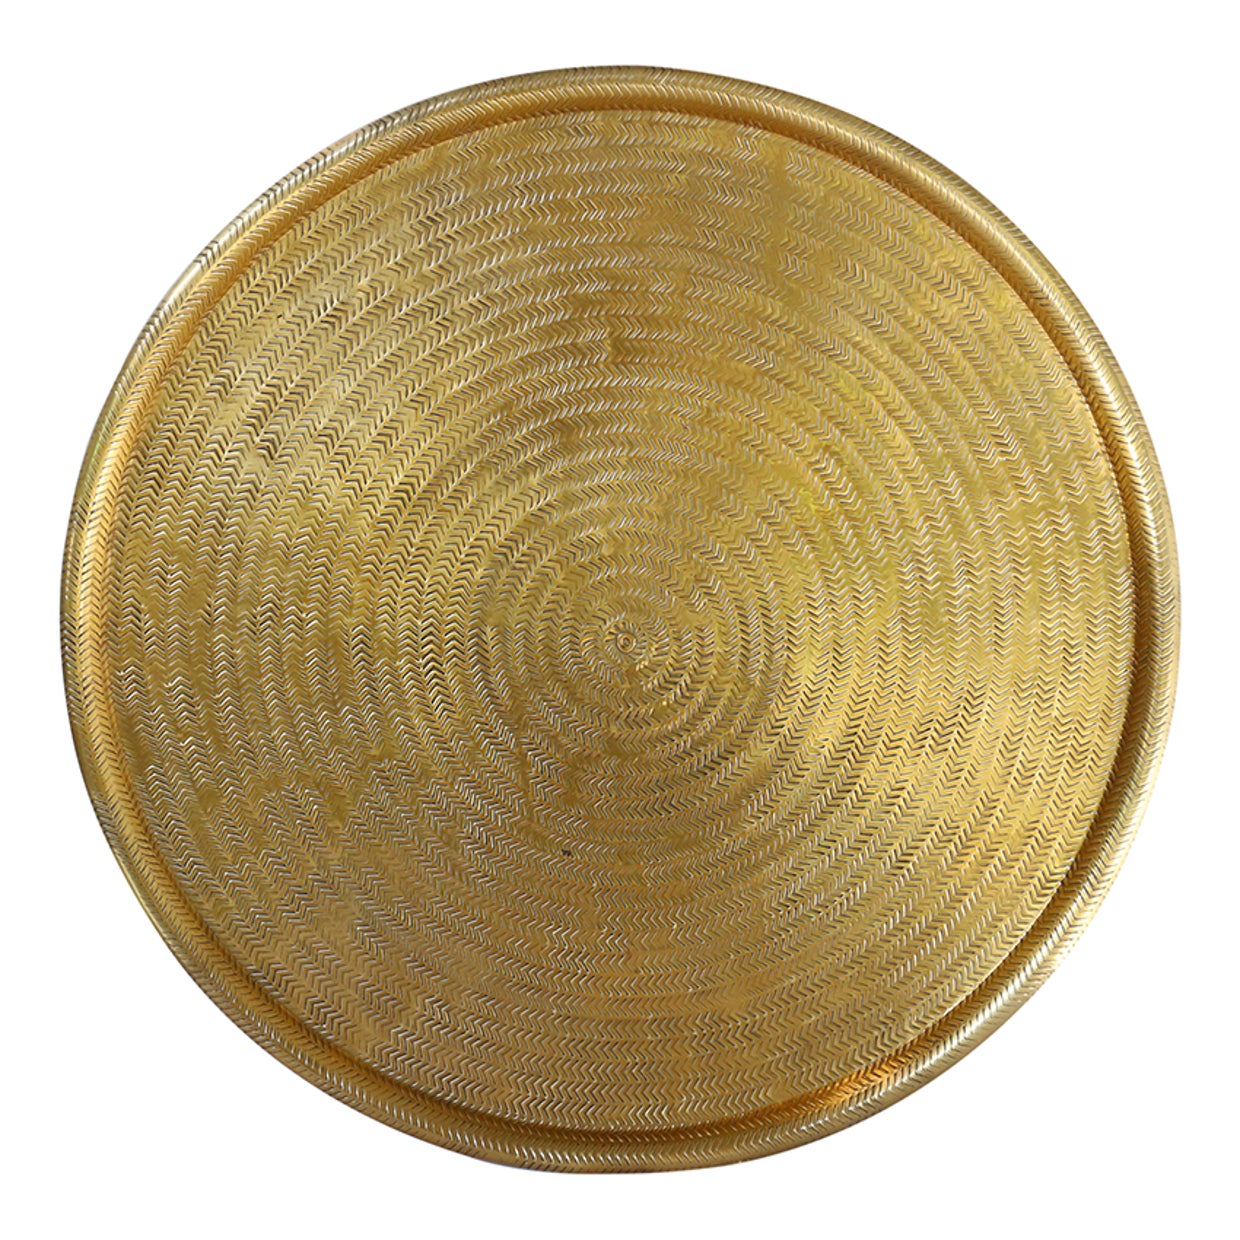 Ravello Large Etched Tray in Antique Brass Finish